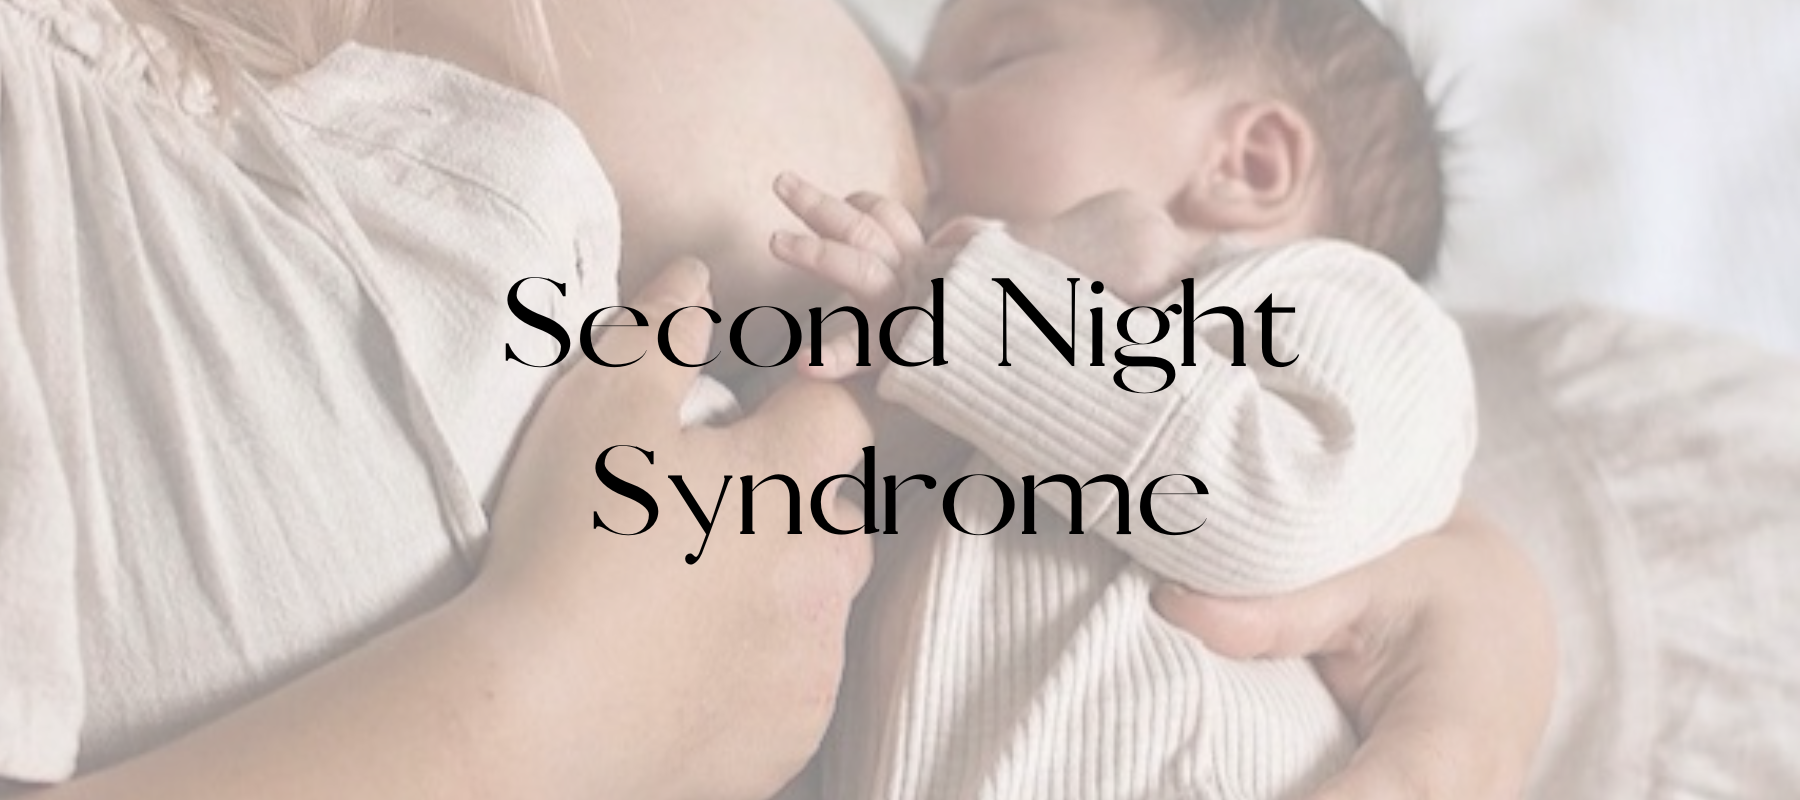 Second Night Syndrome